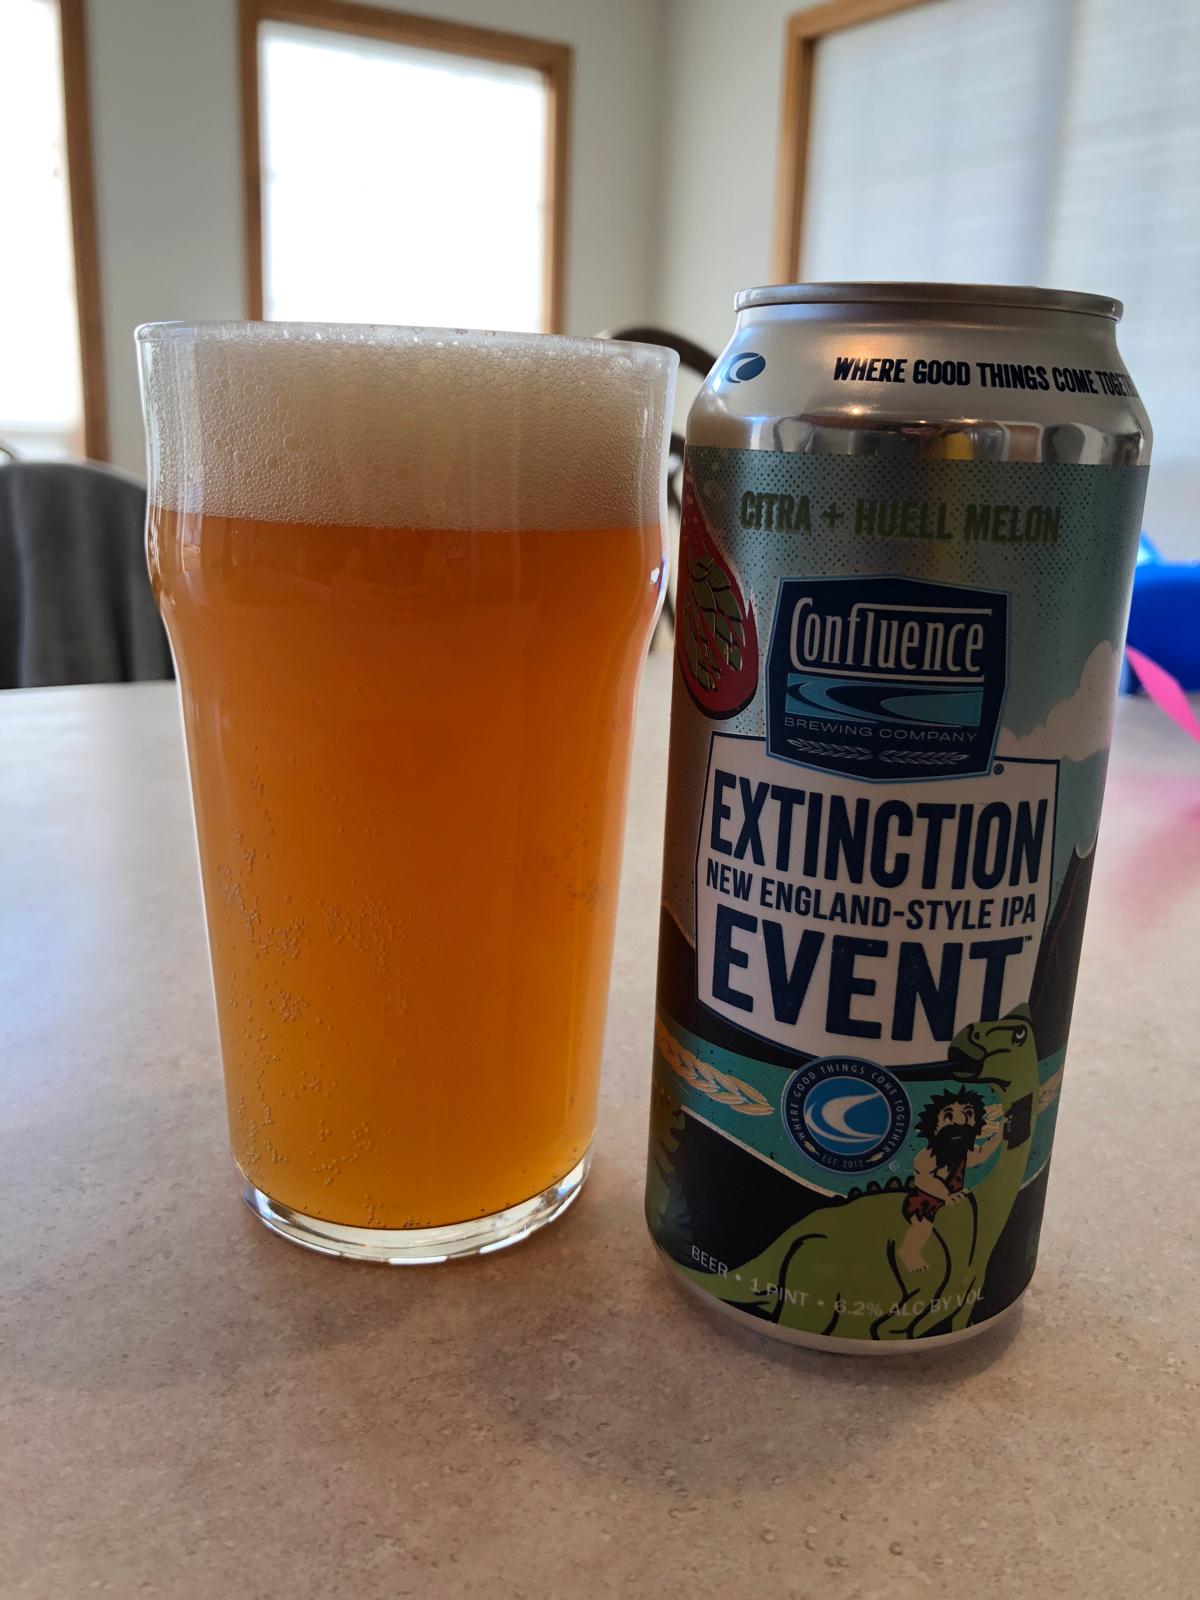 Extinction Event- Citra And Huell Melon New England IPA